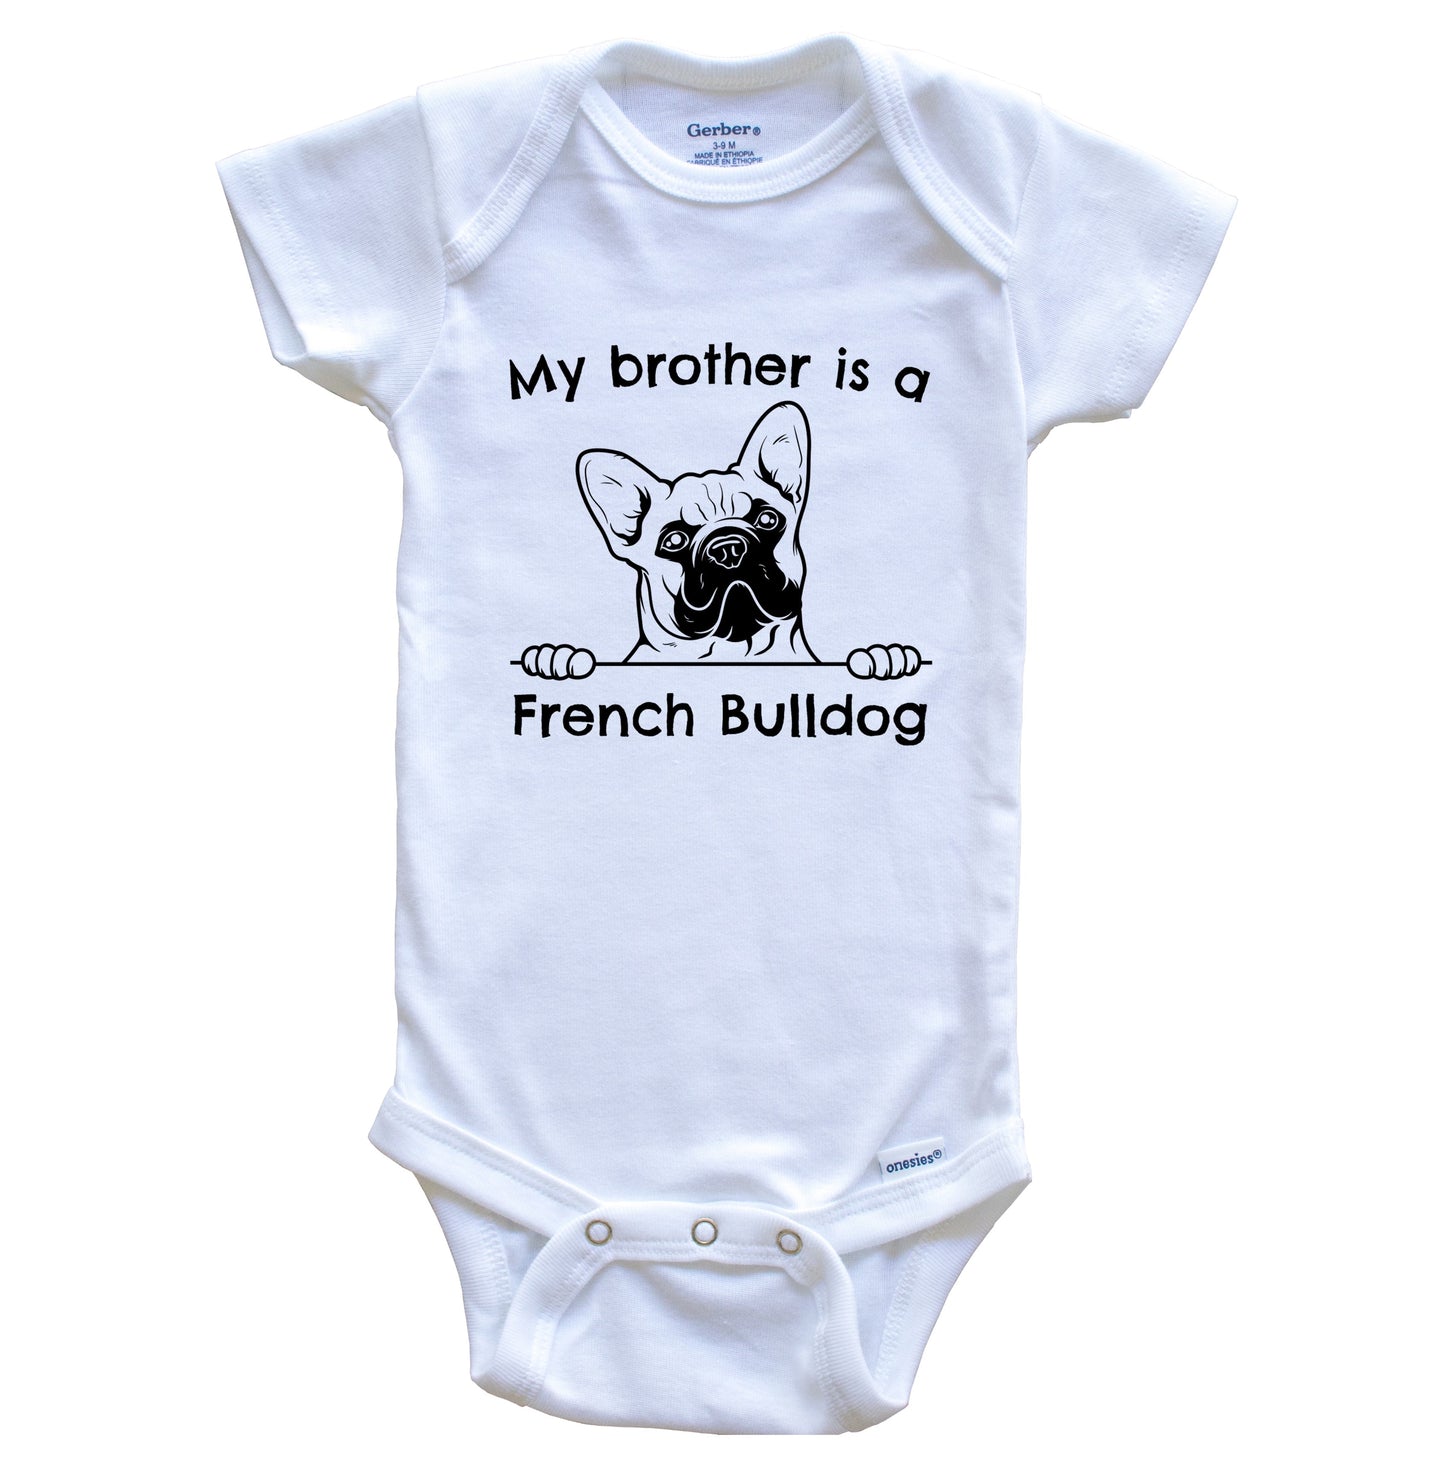 My Brother Is A French Bulldog One Piece Baby Bodysuit